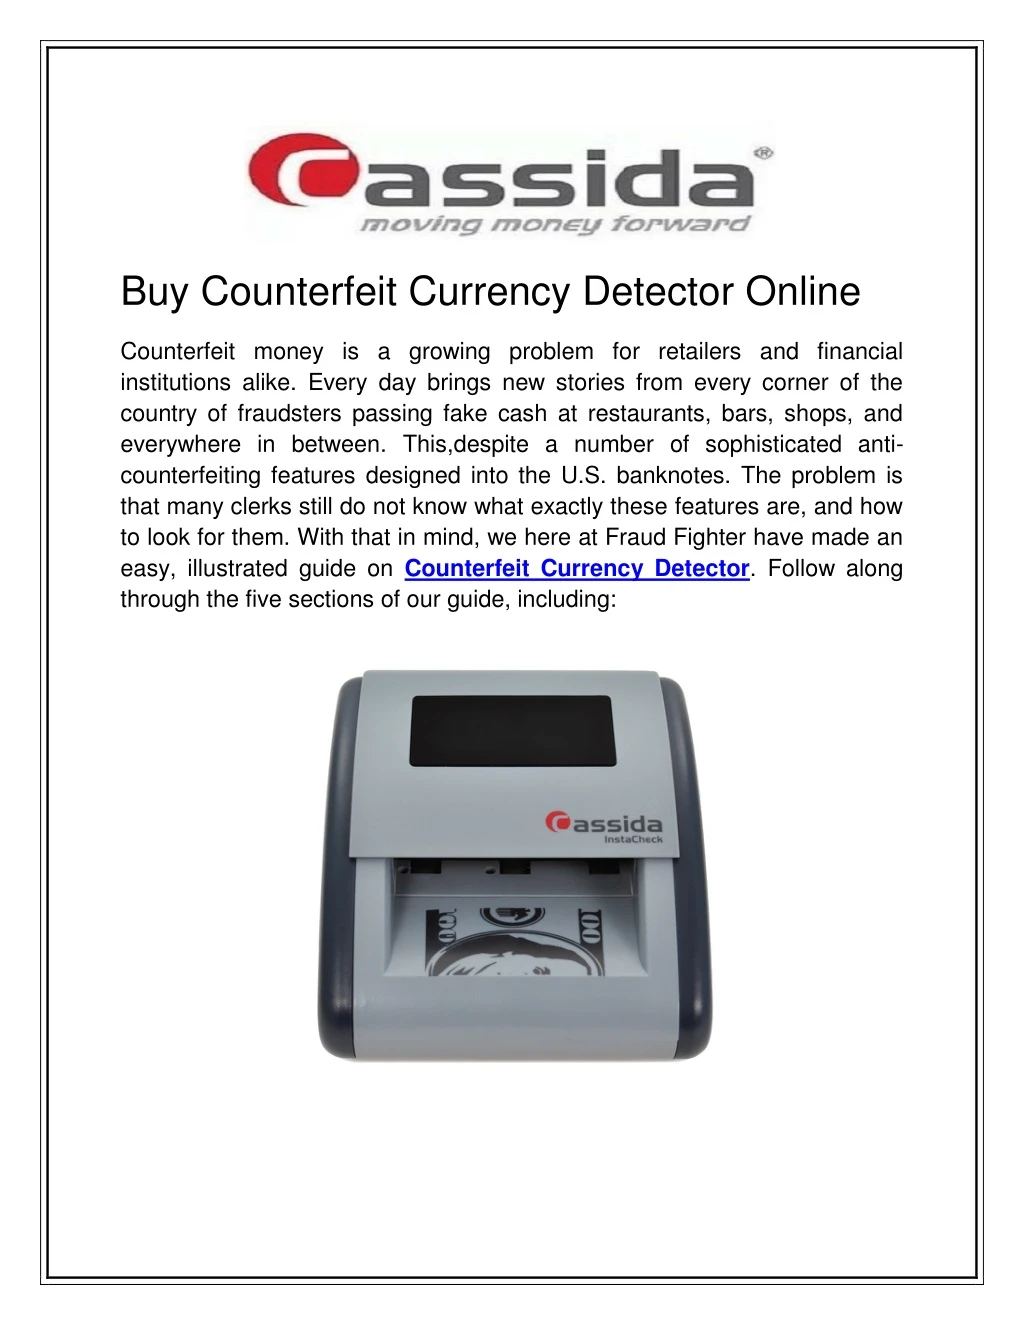 buy counterfeit currency detector online